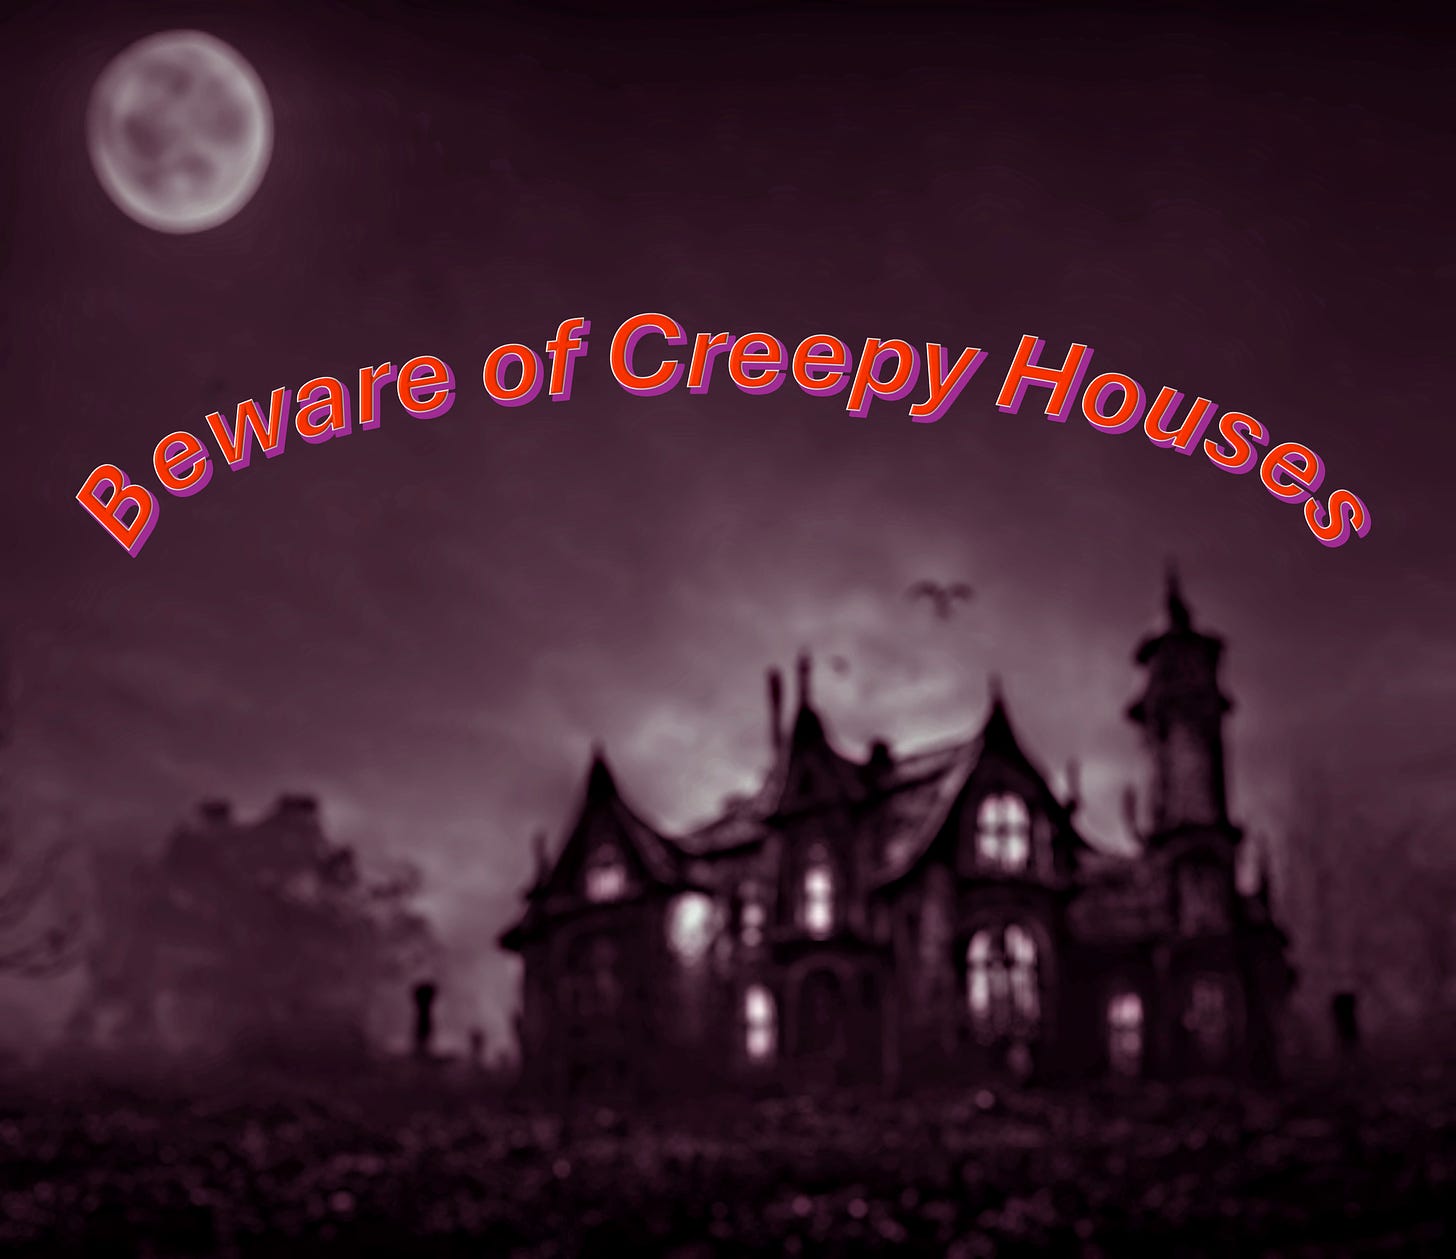 Dark, old fashioned house, on a moonlit night. "Beware of Creepy Houses" in orange text.